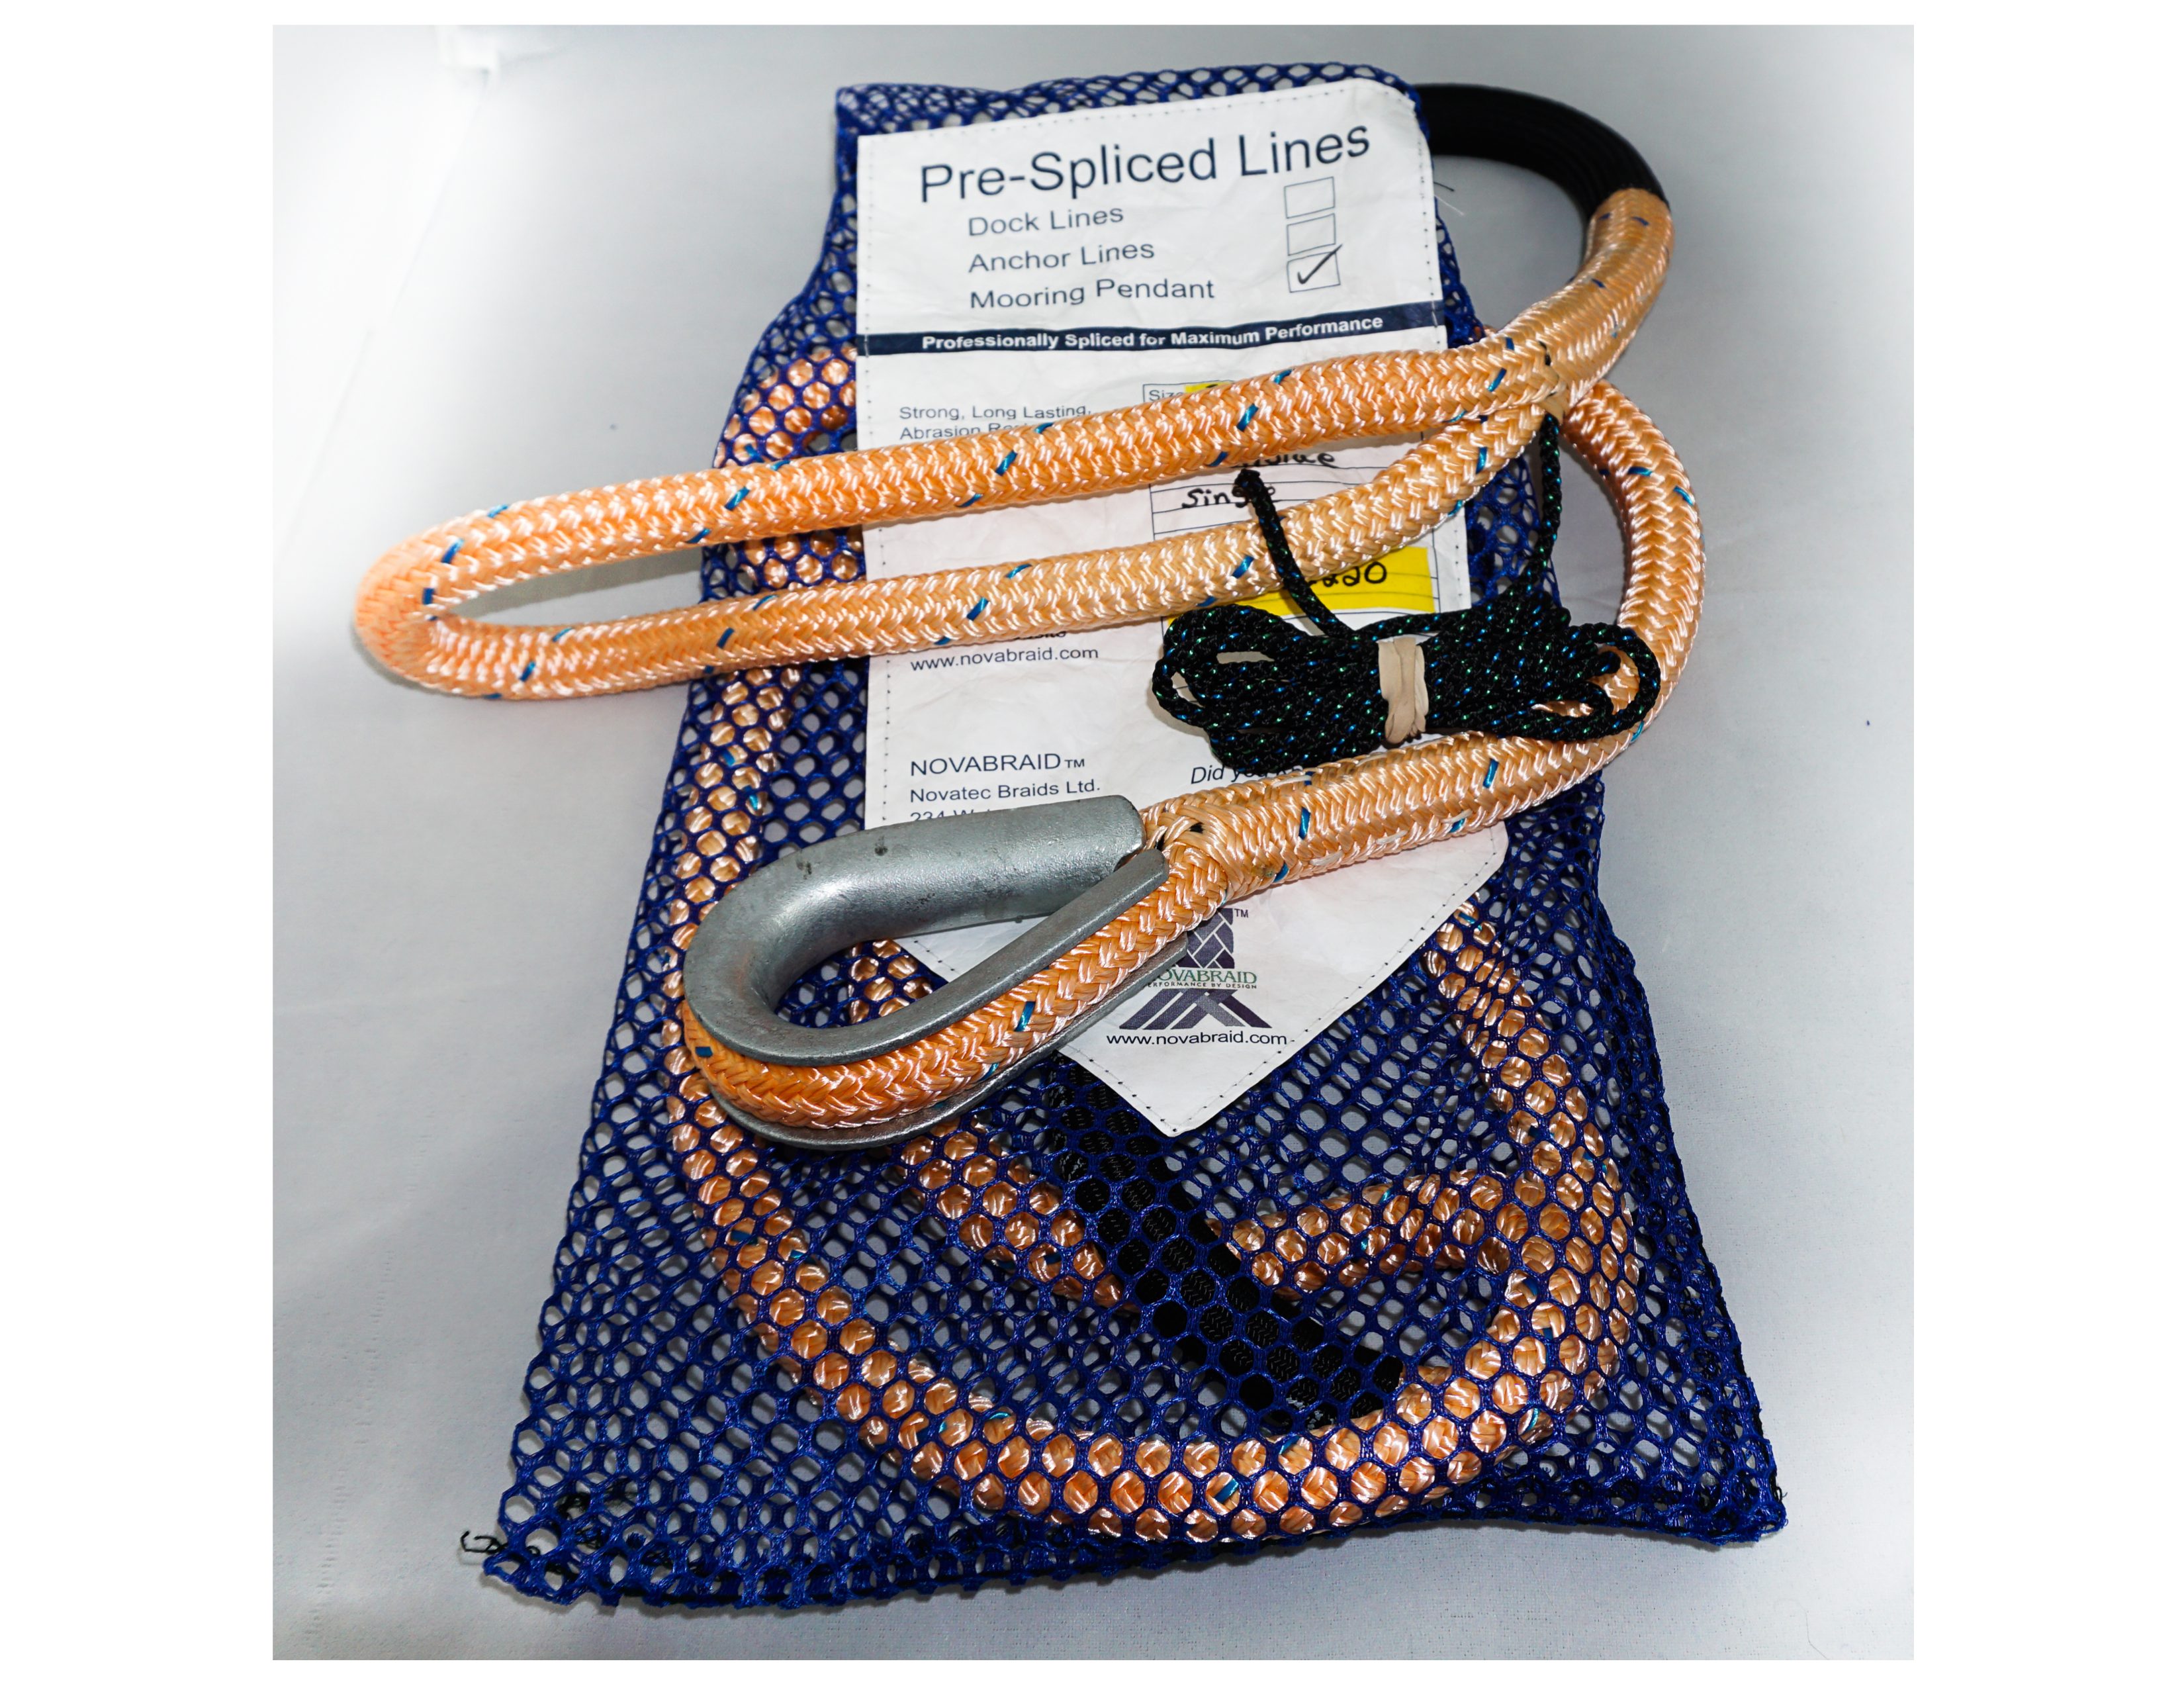 Floating Rope and Cork Line from the Cordage Experts at Novabraid